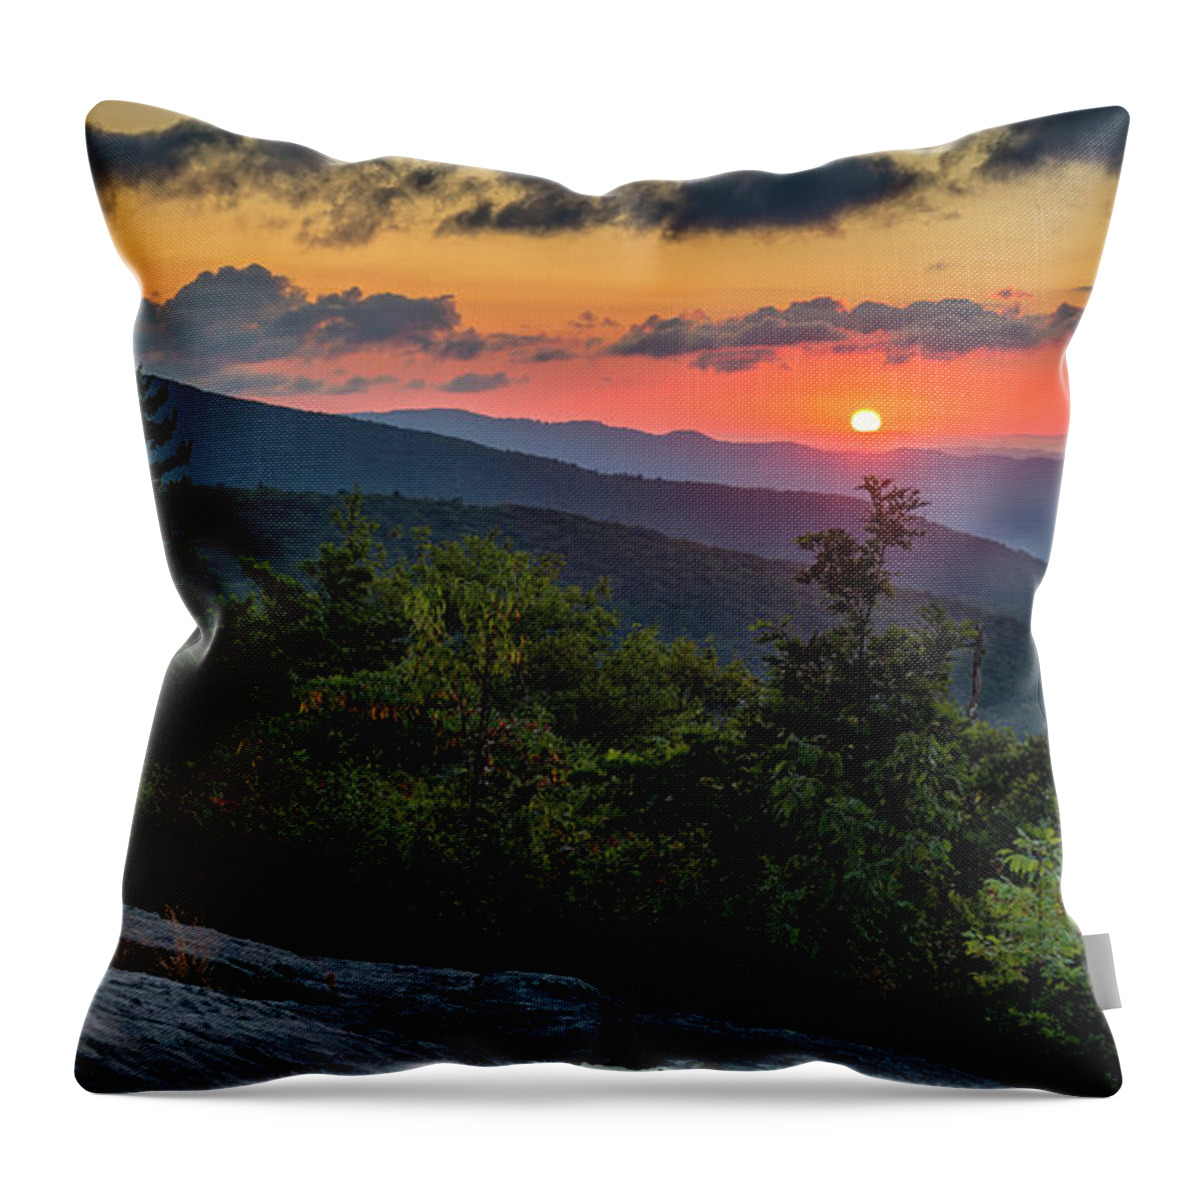 Blue Ridge Parkway Throw Pillow featuring the photograph Blue Ridge Parkway Sunrise - Beacon Heights - North Carolina by Mike Koenig